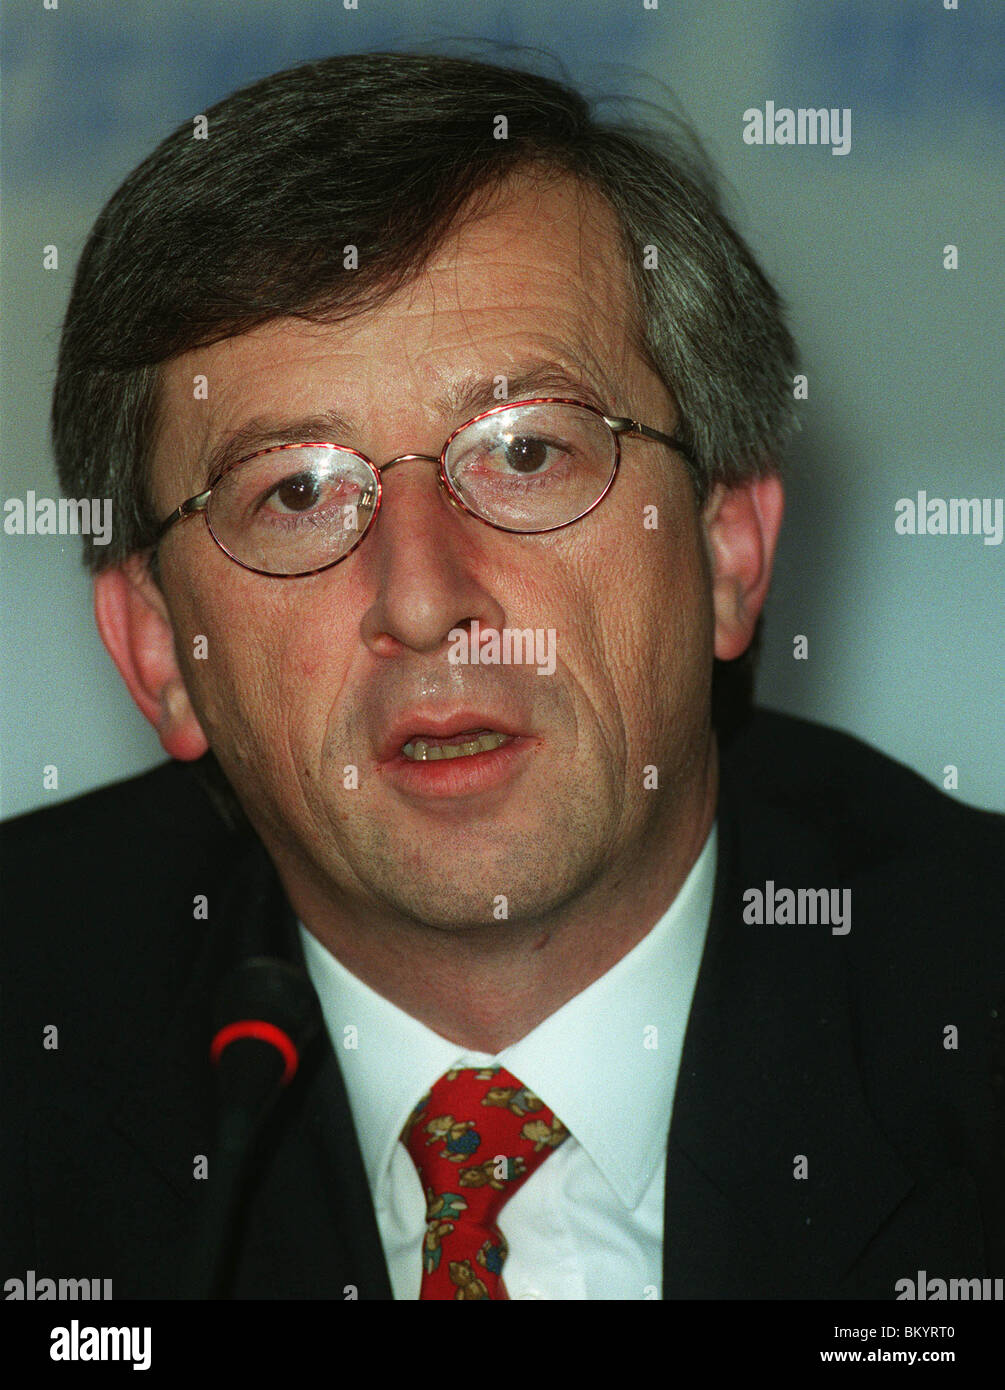 JEAN-CLAUDE JUNCKER PRIME MINISTER OF LUXEMBOURG 17 December 1997 Stock  Photo - Alamy